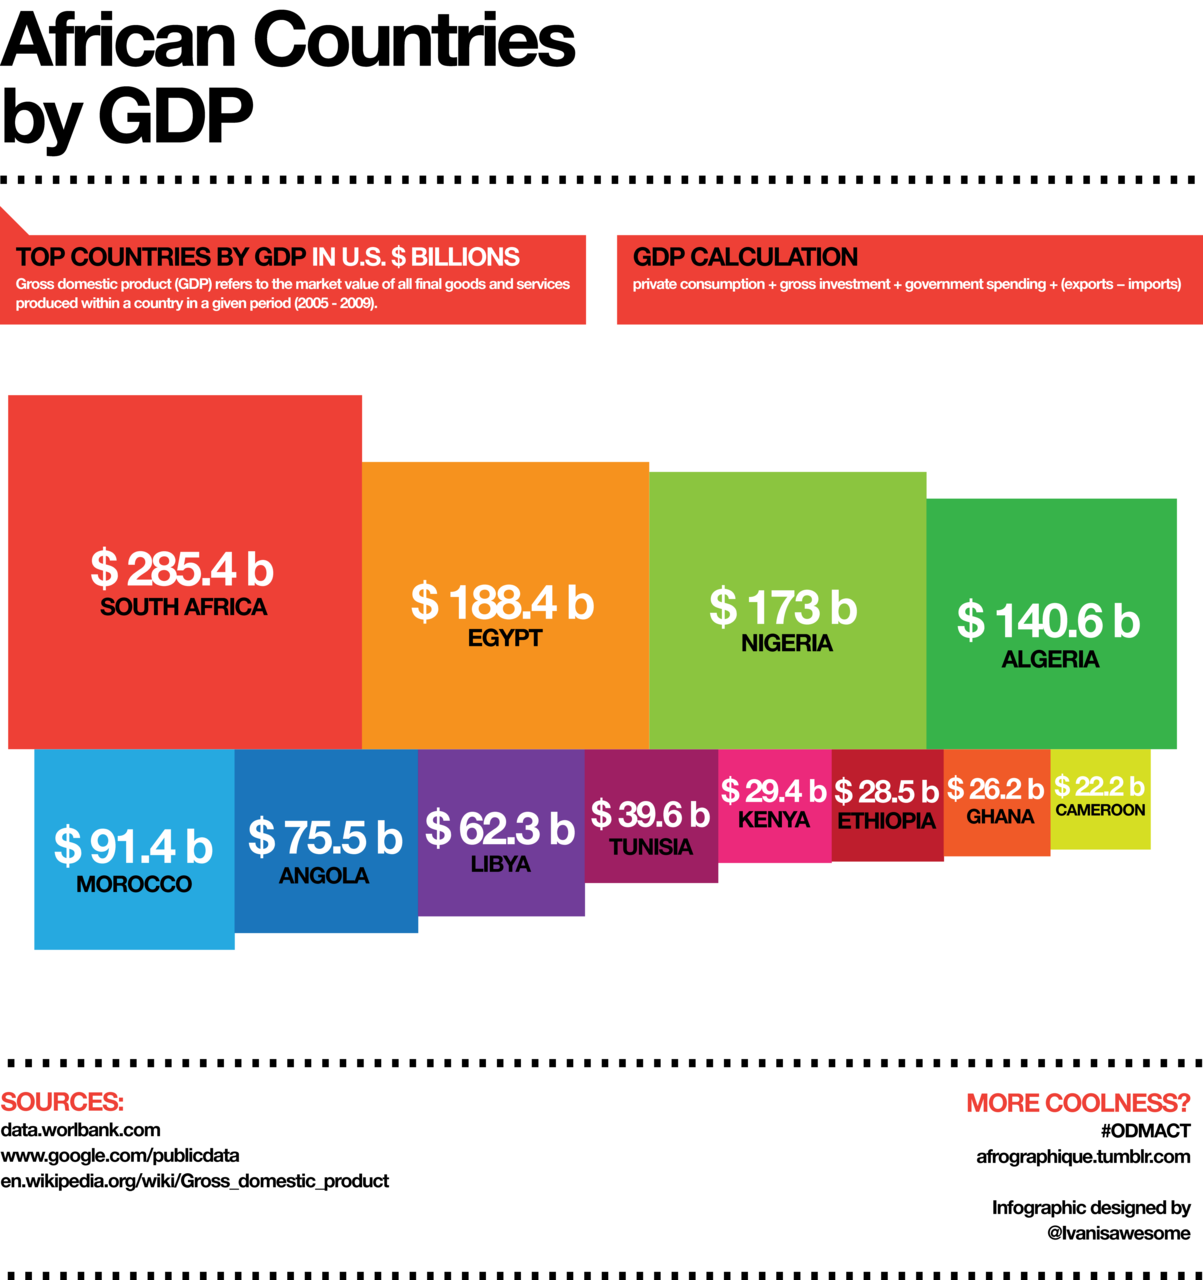 African Countries by GDP